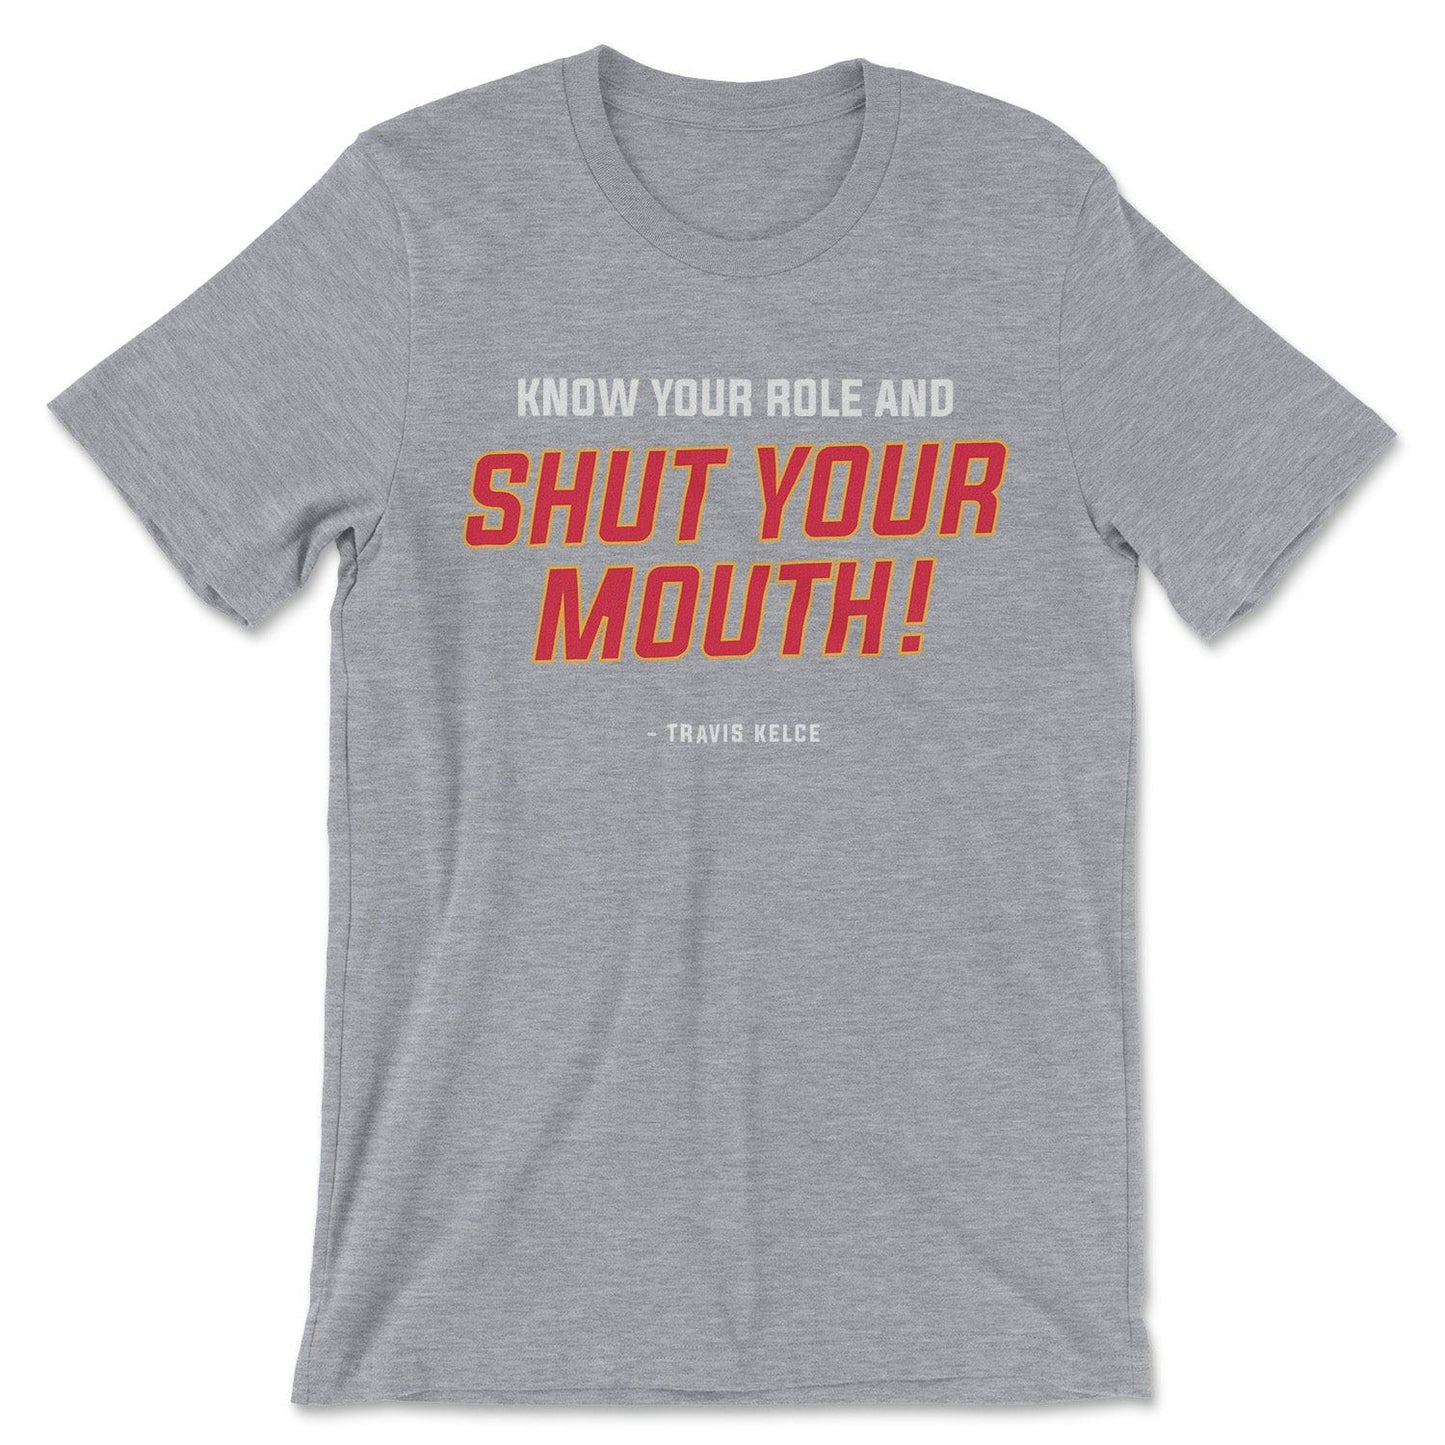 KC Swah Kansas City Chiefs red, yellow, white SHUT YOUR MOUTH on athletic heather grey unisex t-shirt 